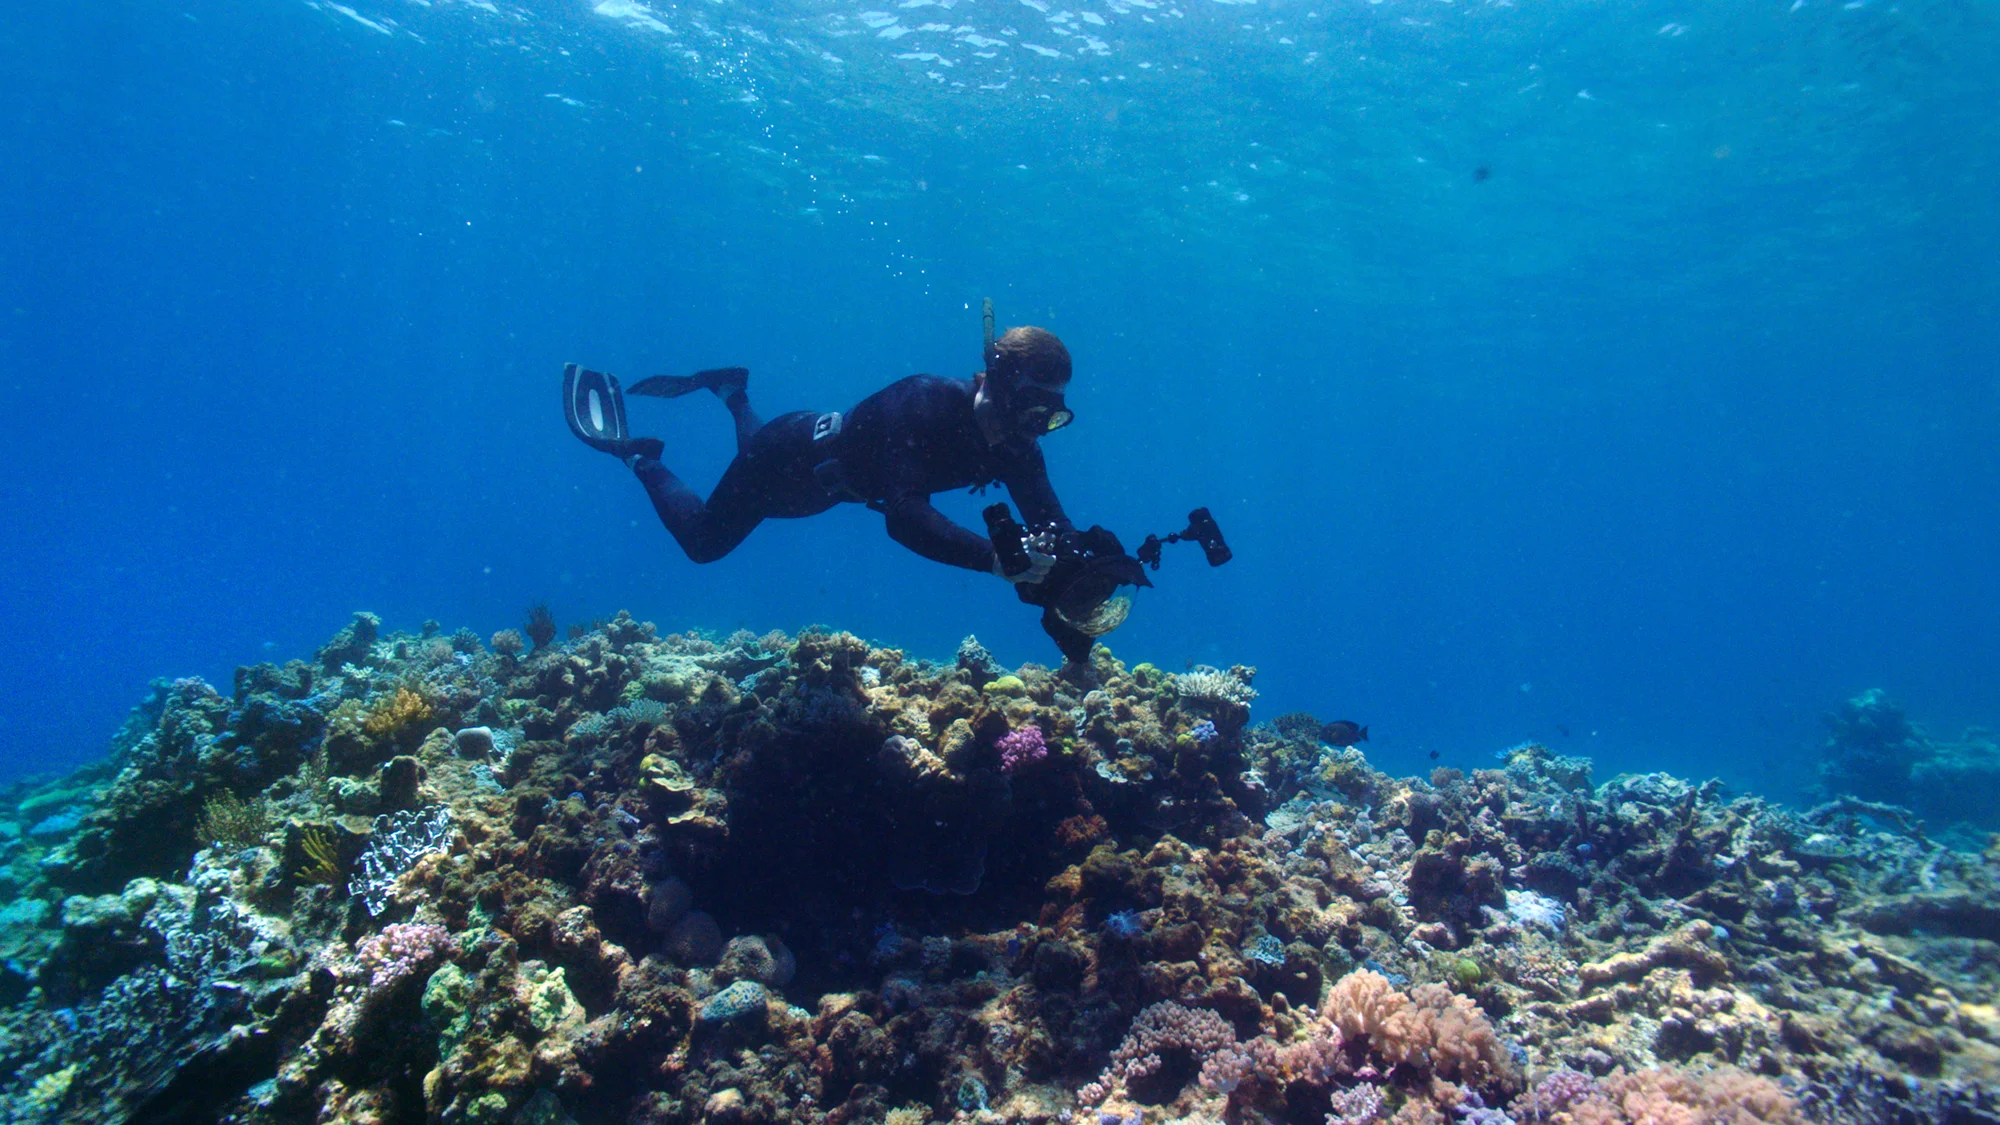 Johnny swims above the coral capturing images on an underwater camera.